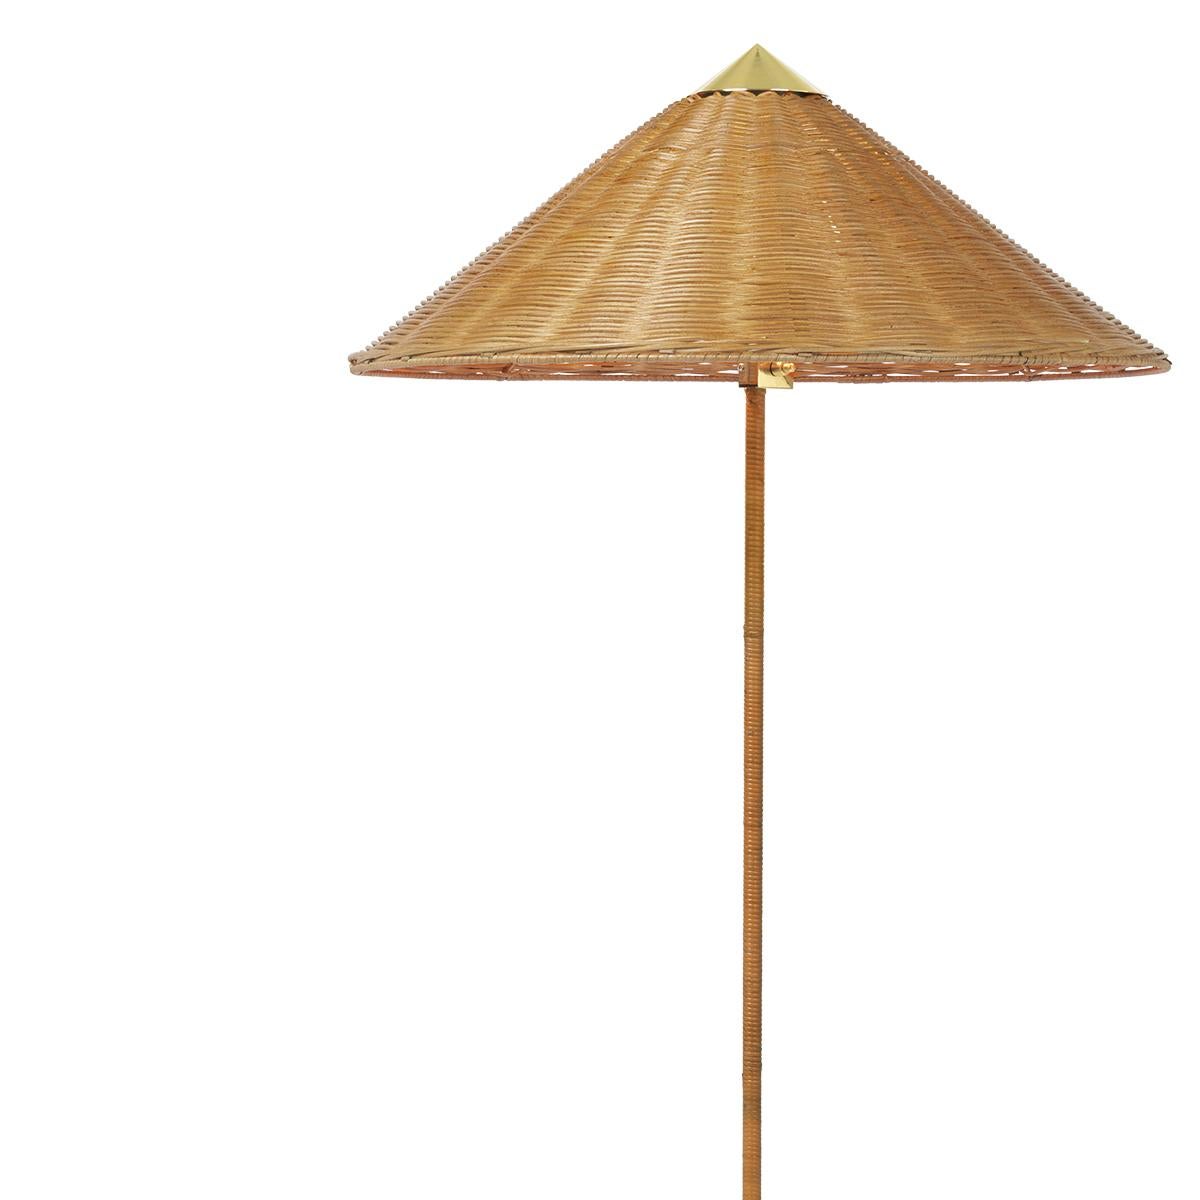 The 9602 floor lamp, also known as “Chinese Hat” was designed by Paavo Tynell in 1935 for the Hotel Aulanko. Characterized by its elegant and airy lampshade and rattan-covered stem, the lamp shows the designer’s limitless imagination and